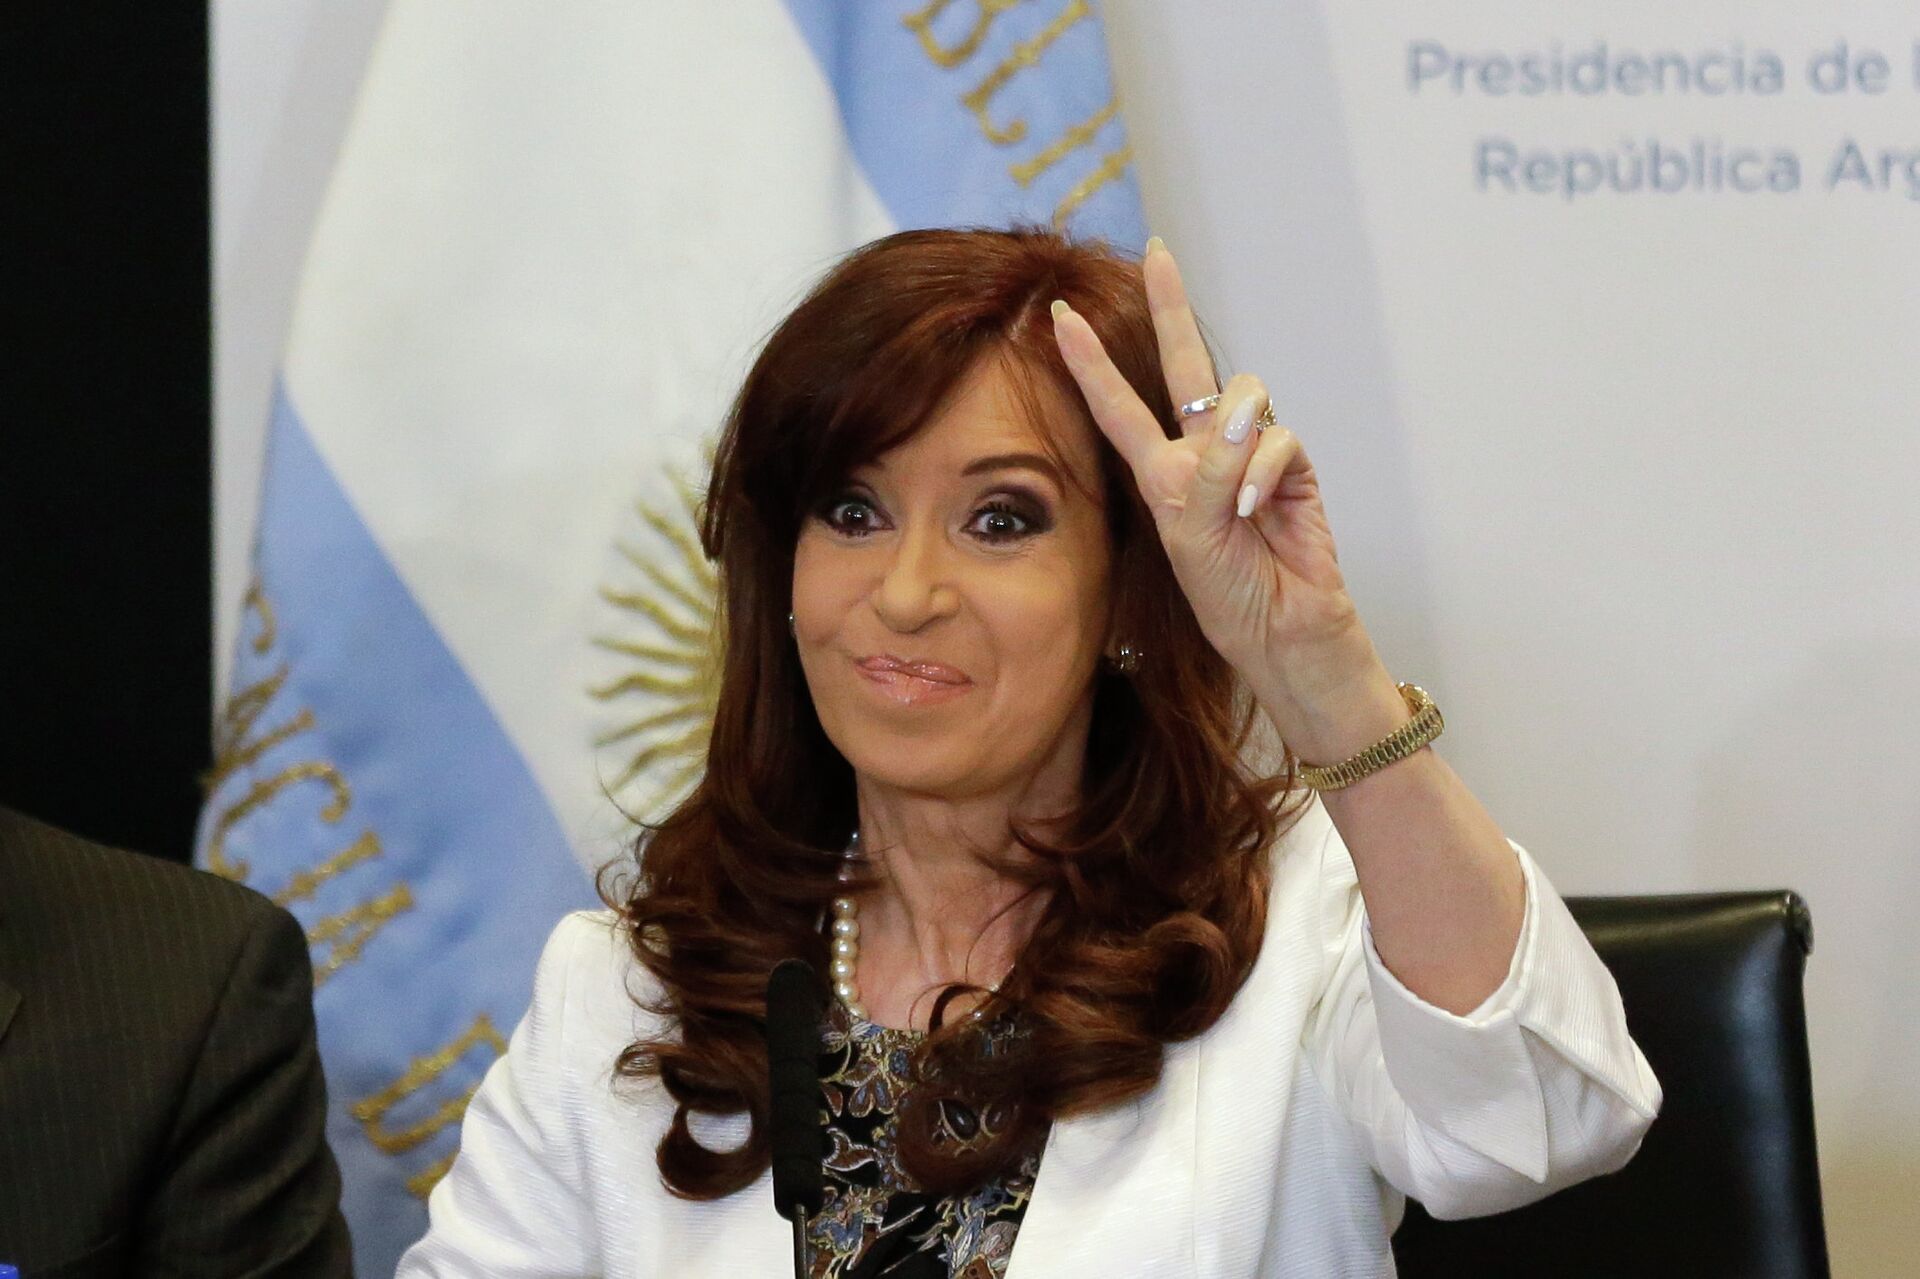 President Cristina Fernandez gestures to supporters during the presentation of a new 100-peso bill at Casa Rosada presidential palace in Buenos Aires, Argentina, Thursday, March 26, 2015. - Sputnik Mundo, 1920, 27.01.2022